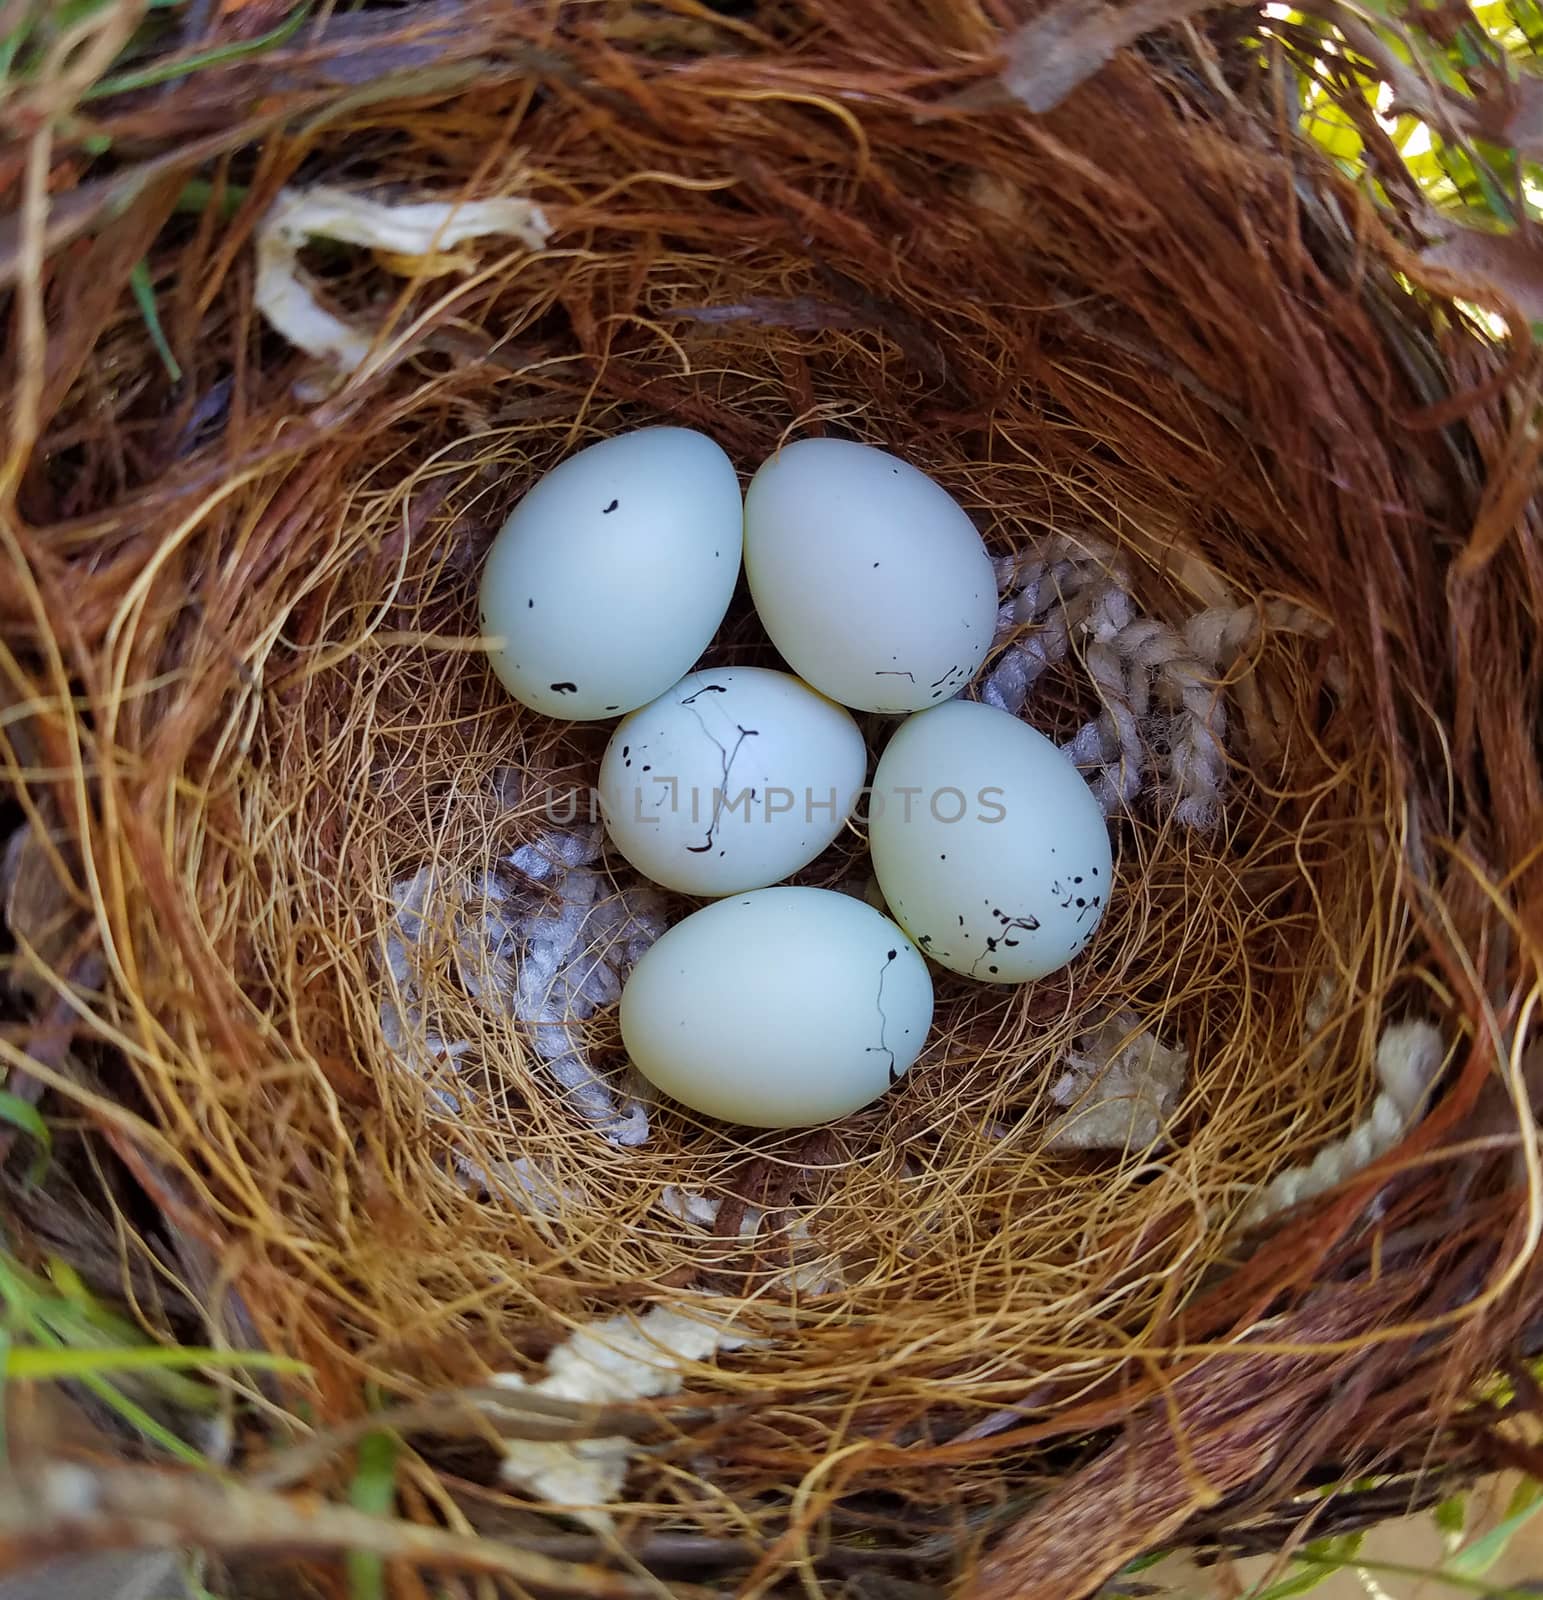 House Finch Eggs by whitechild